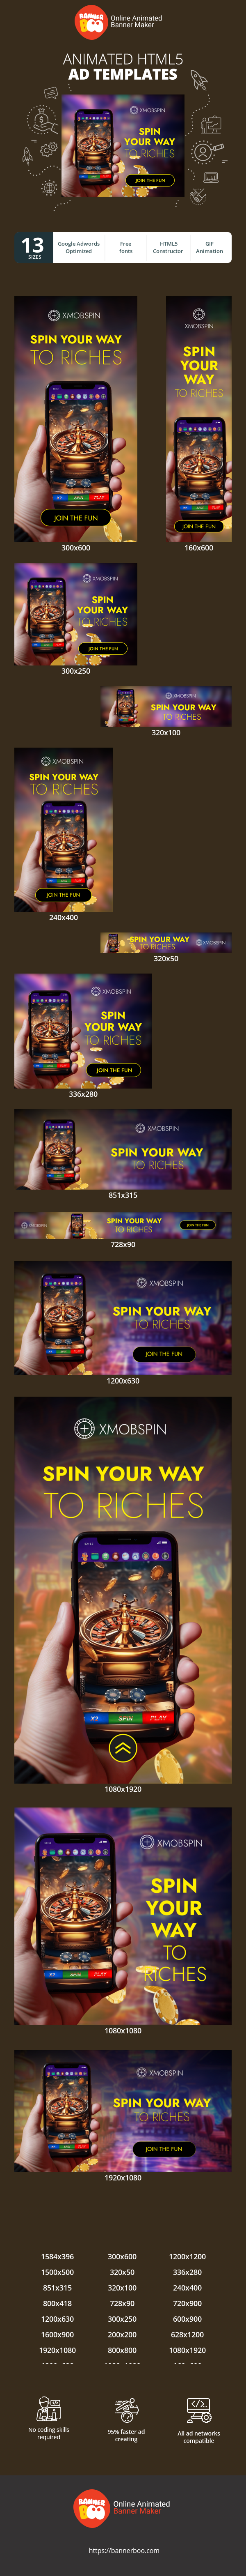 Banner ad template — Spin Your Way To Riches — Gambling